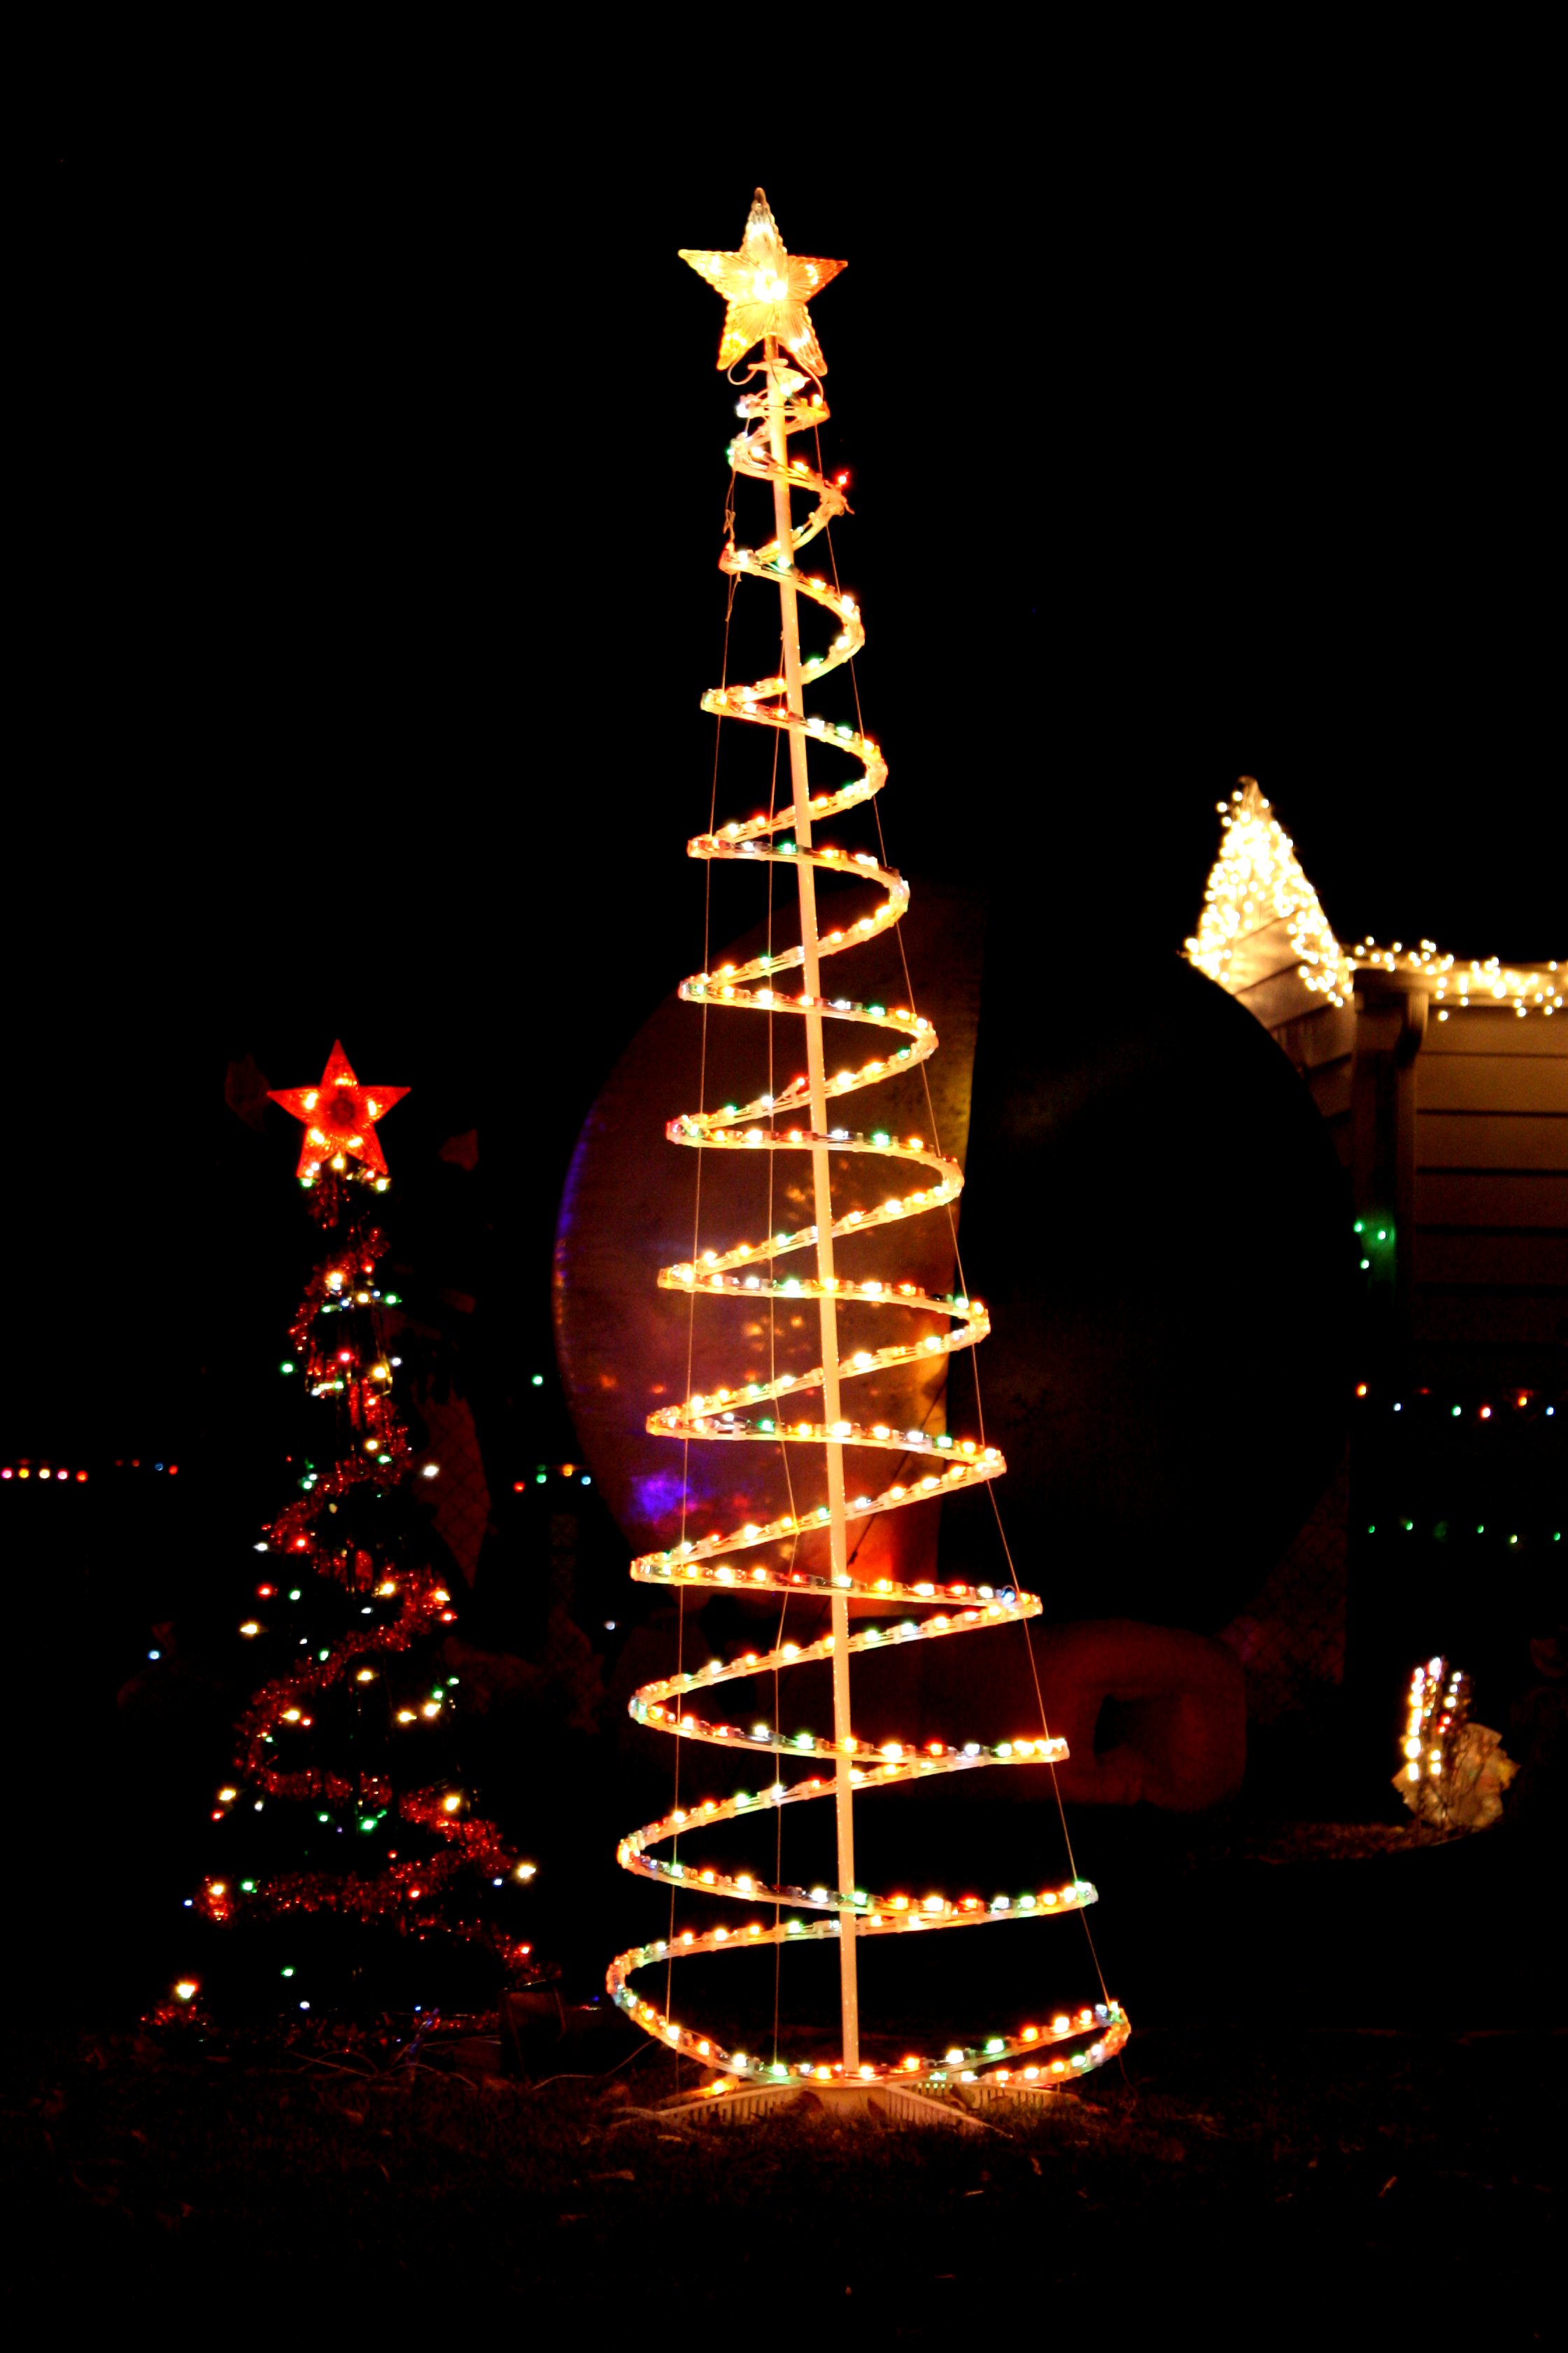 lighted holiday yard decorations in the form of christmas trees ...